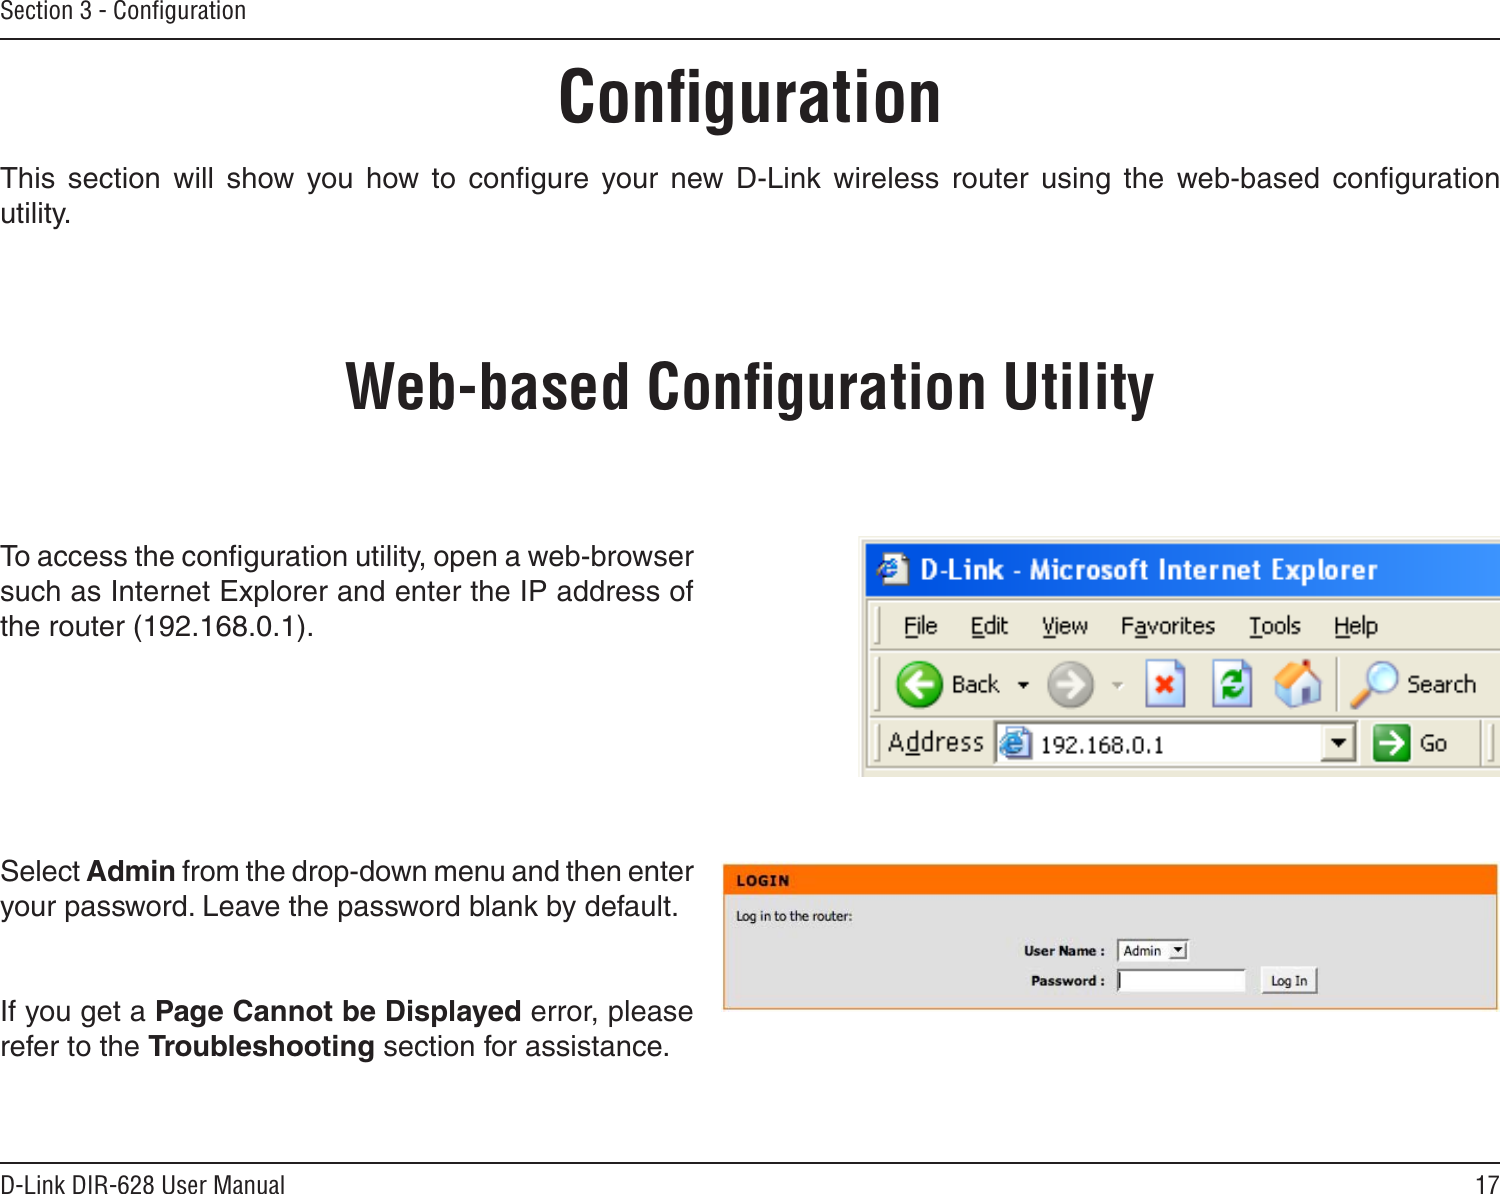 17D-Link DIR-628 User ManualSection 3 - ConﬁgurationConﬁgurationThis  section  will  show  you  how  to  conﬁgure  your  new  D-Link  wireless  router  using  the  web-based  conﬁguration utility.Web-based Conﬁguration UtilityTo access the conﬁguration utility, open a web-browser such as Internet Explorer and enter the IP address of the router (192.168.0.1).Select Admin from the drop-down menu and then enter your password. Leave the password blank by default.If you get a Page Cannot be Displayed error, please refer to the Troubleshooting section for assistance.